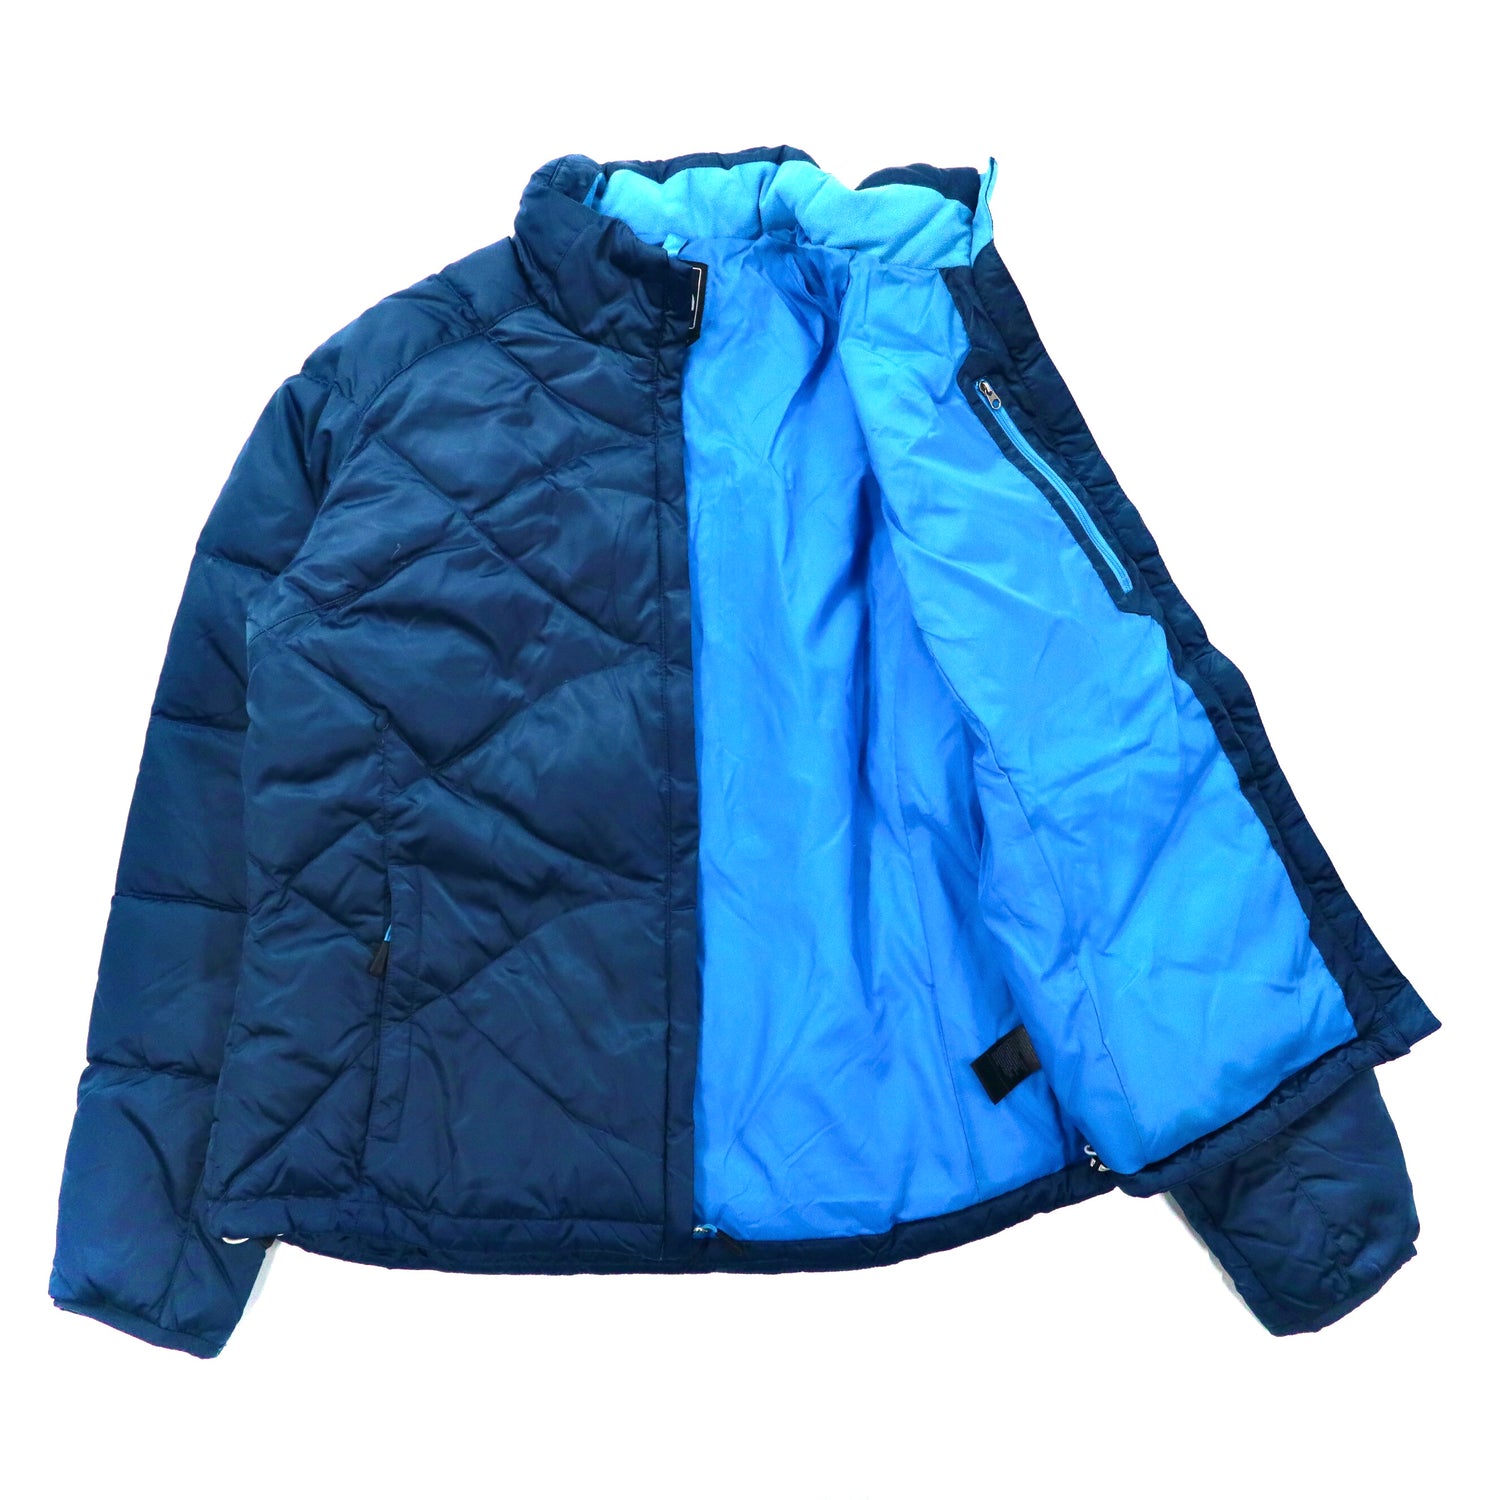 THE NORTH FACE PUFFER JACKET XL Navy 550 Fill Power – 日本然リトテ